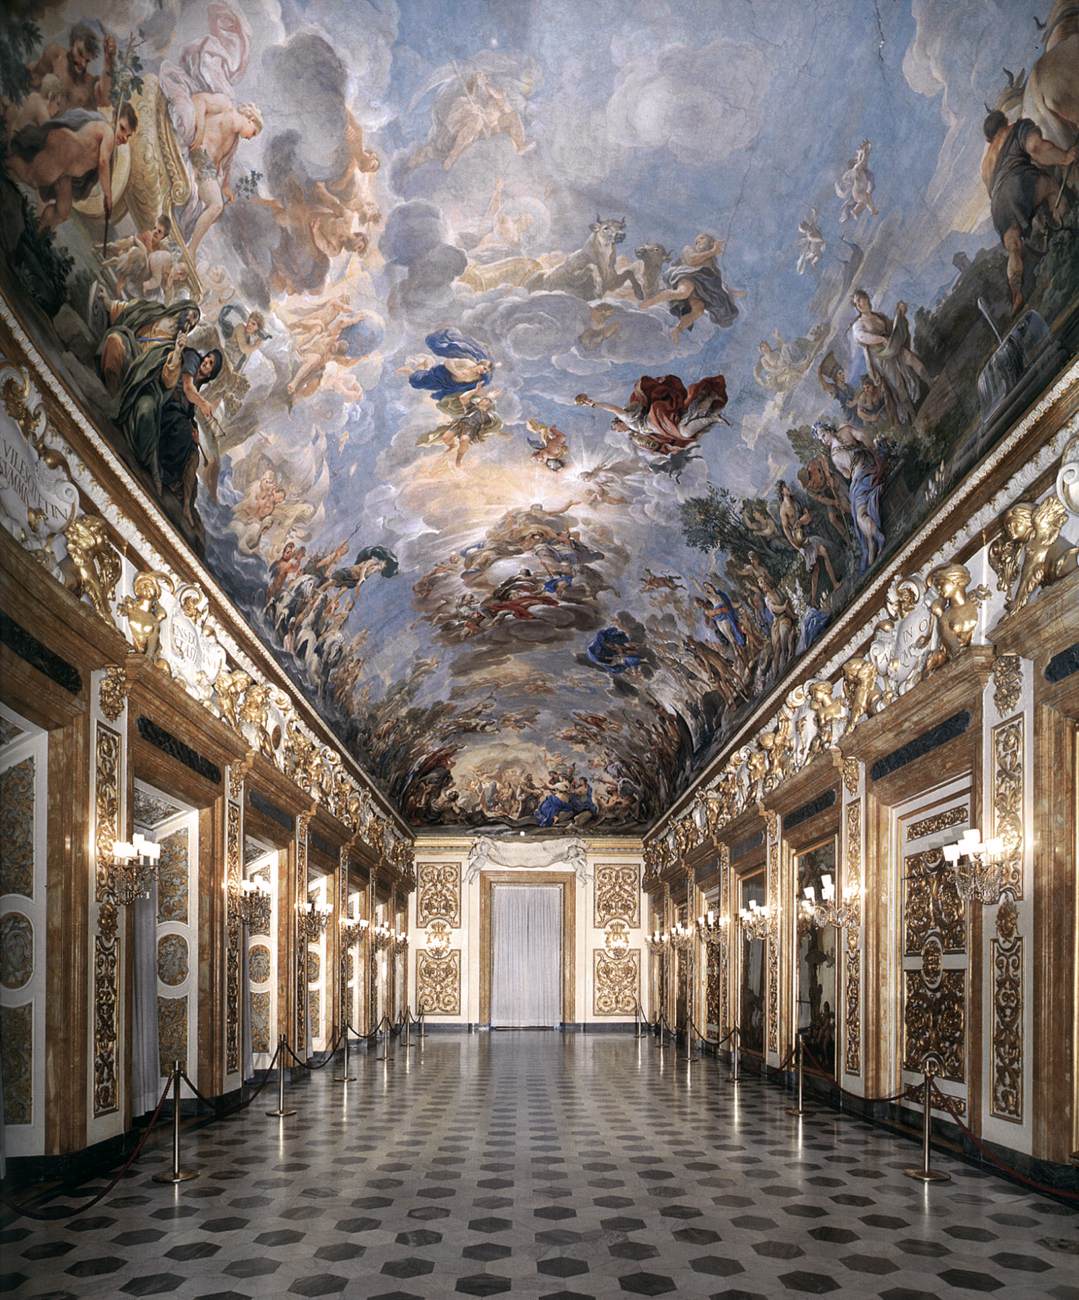 The Riccardiana Gallery with Luca Giordano's Apotheosis of the Medici (1683-1685) in the Medici Riccardi Palace, Florence